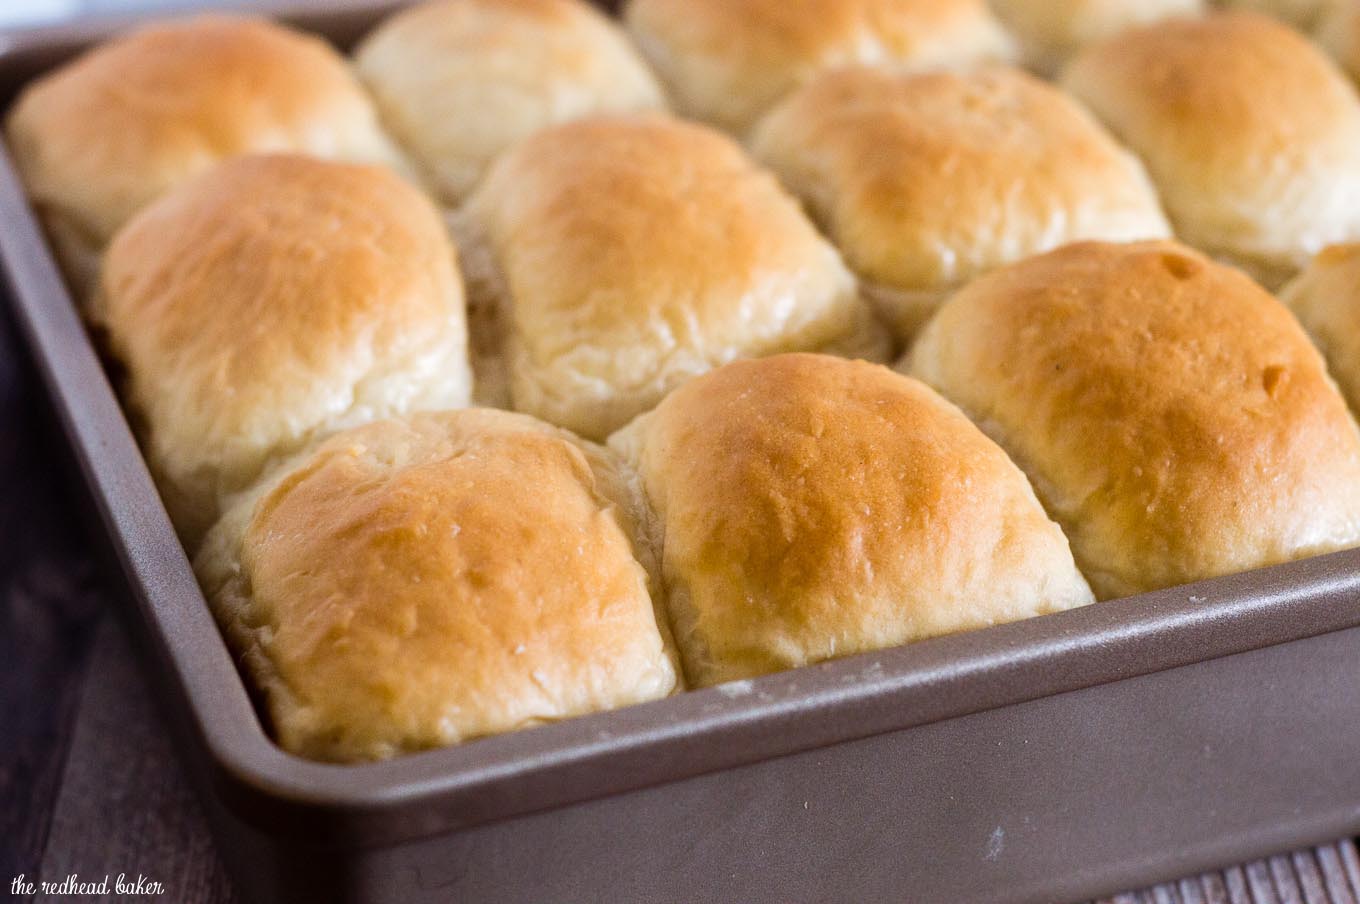 Fluffy potato rolls are soft, light and more flavorful than plain rolls. They stay soft for several days, so they're ideal for Thanksgiving. #SundaySupper